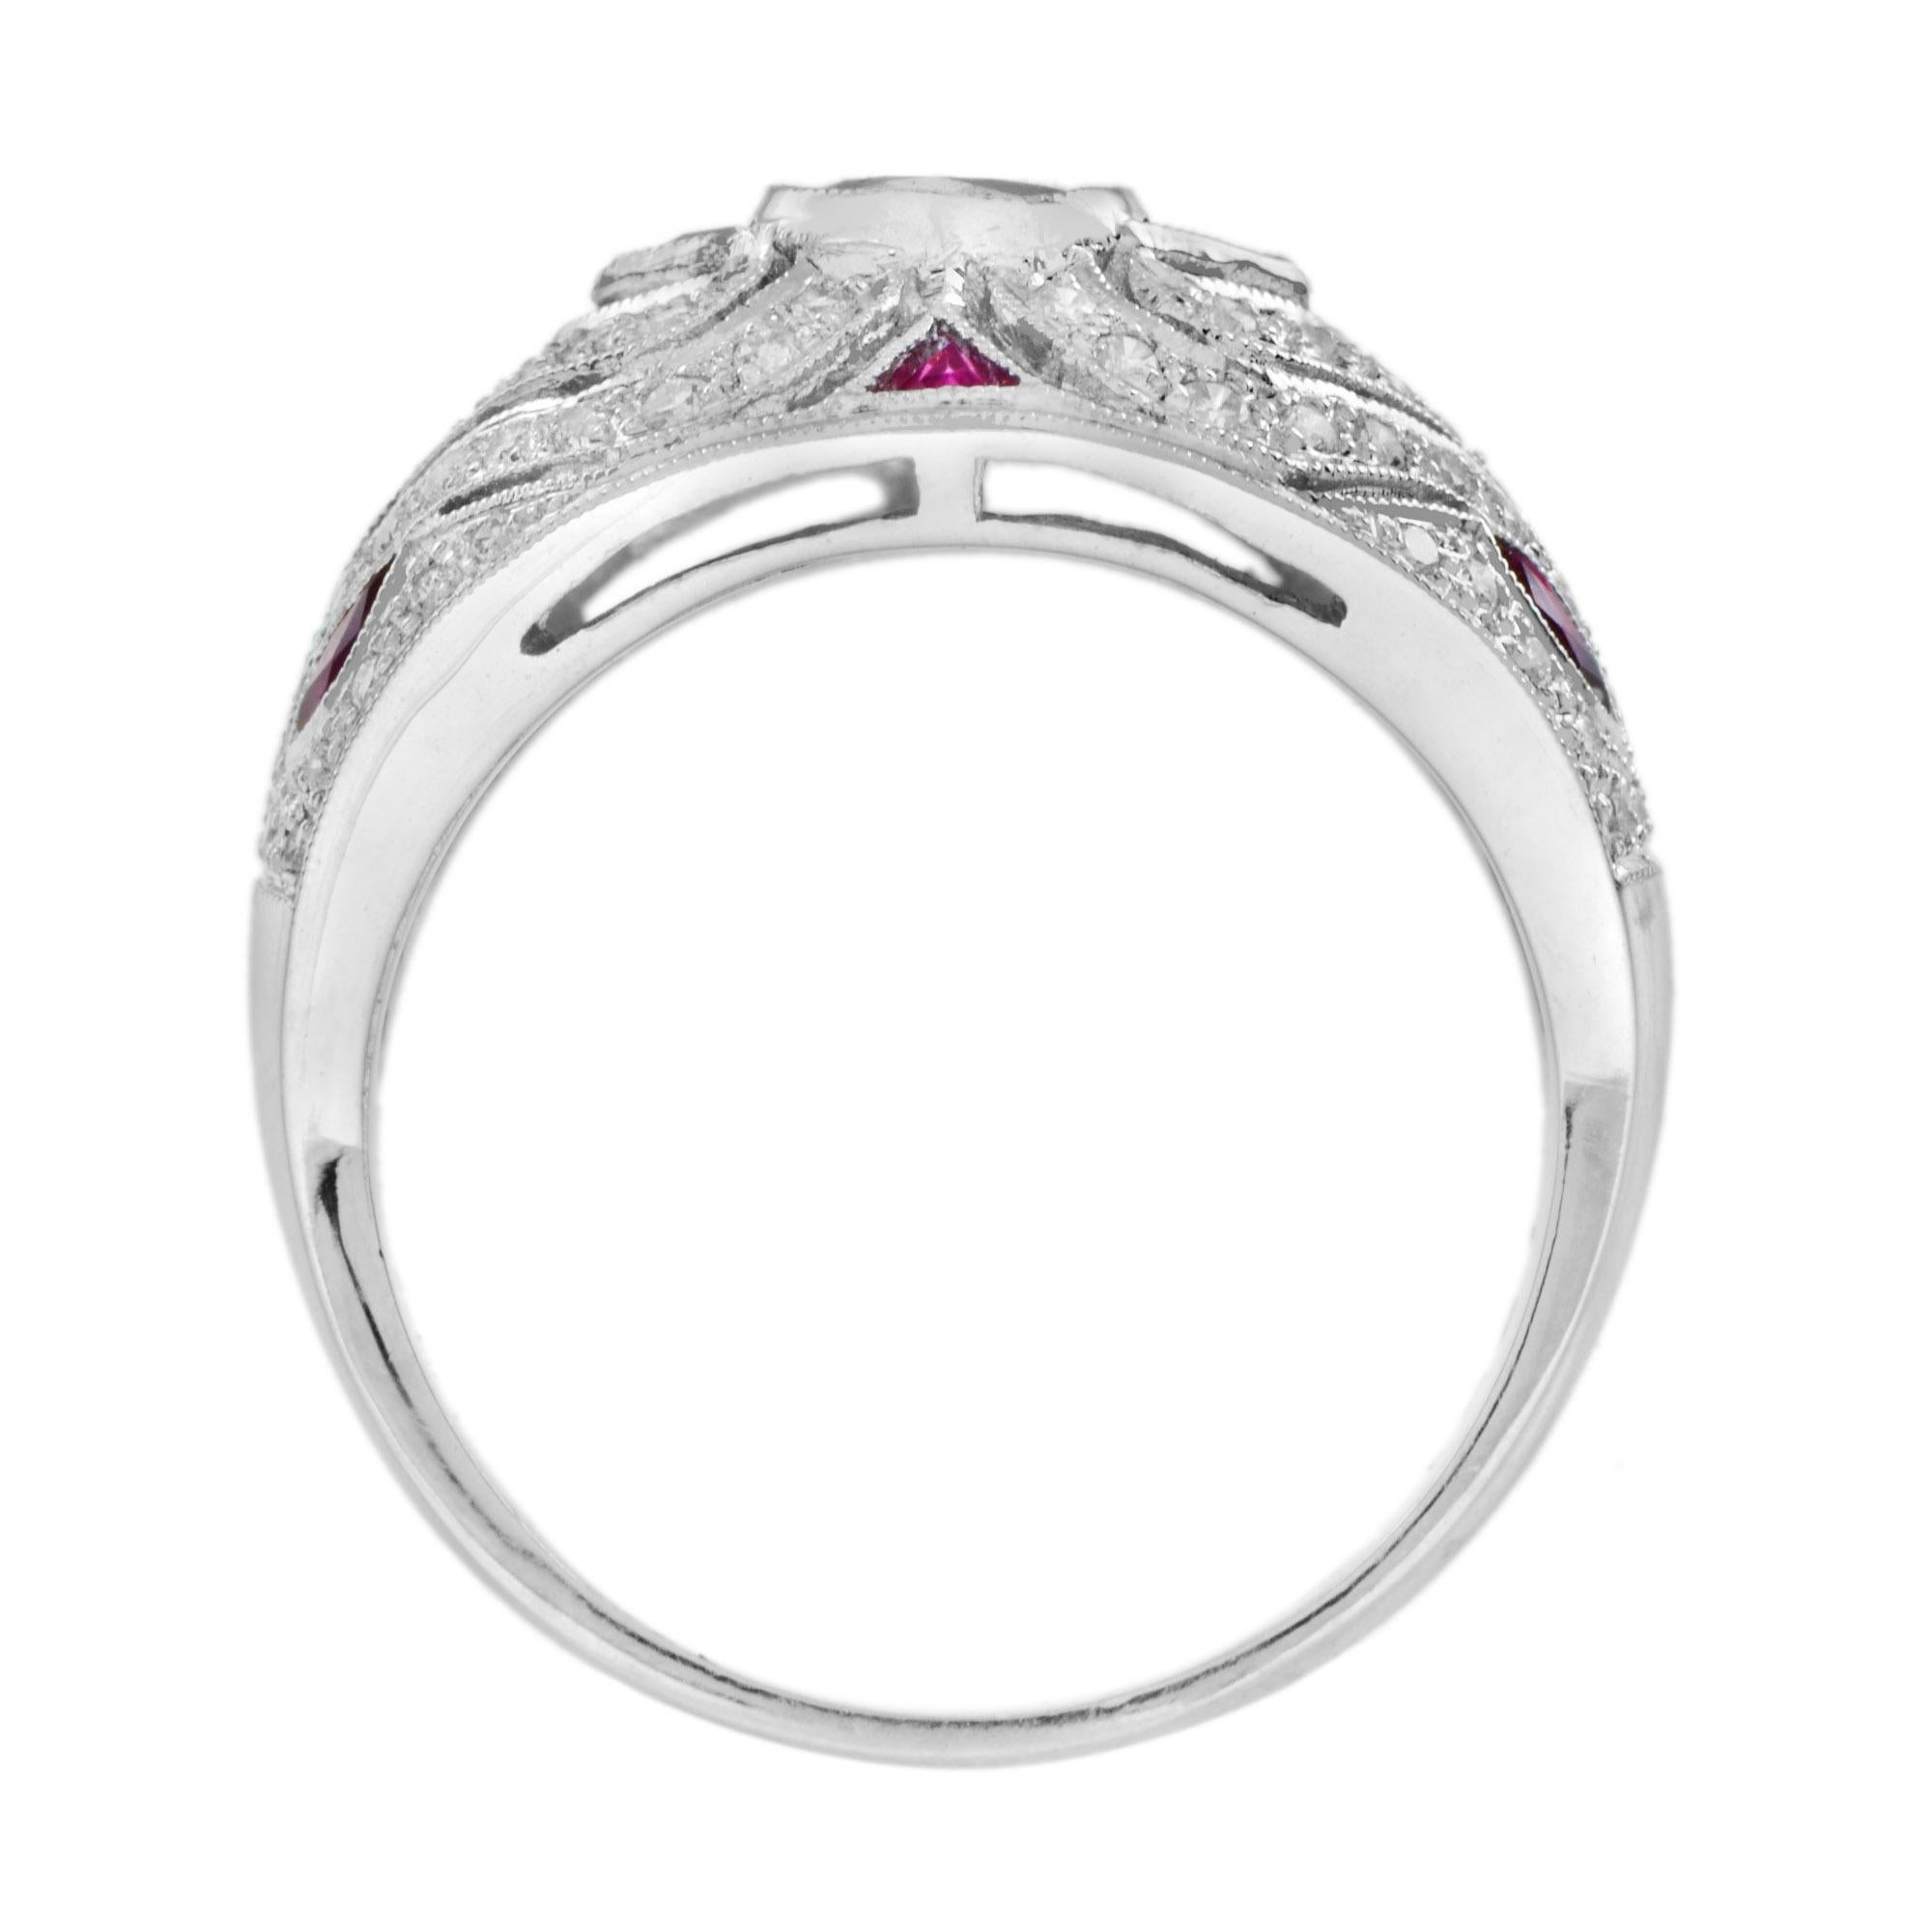 Women's Art Deco Style Oval Ruby and Diamond Bombe Ring in 18K White Gold